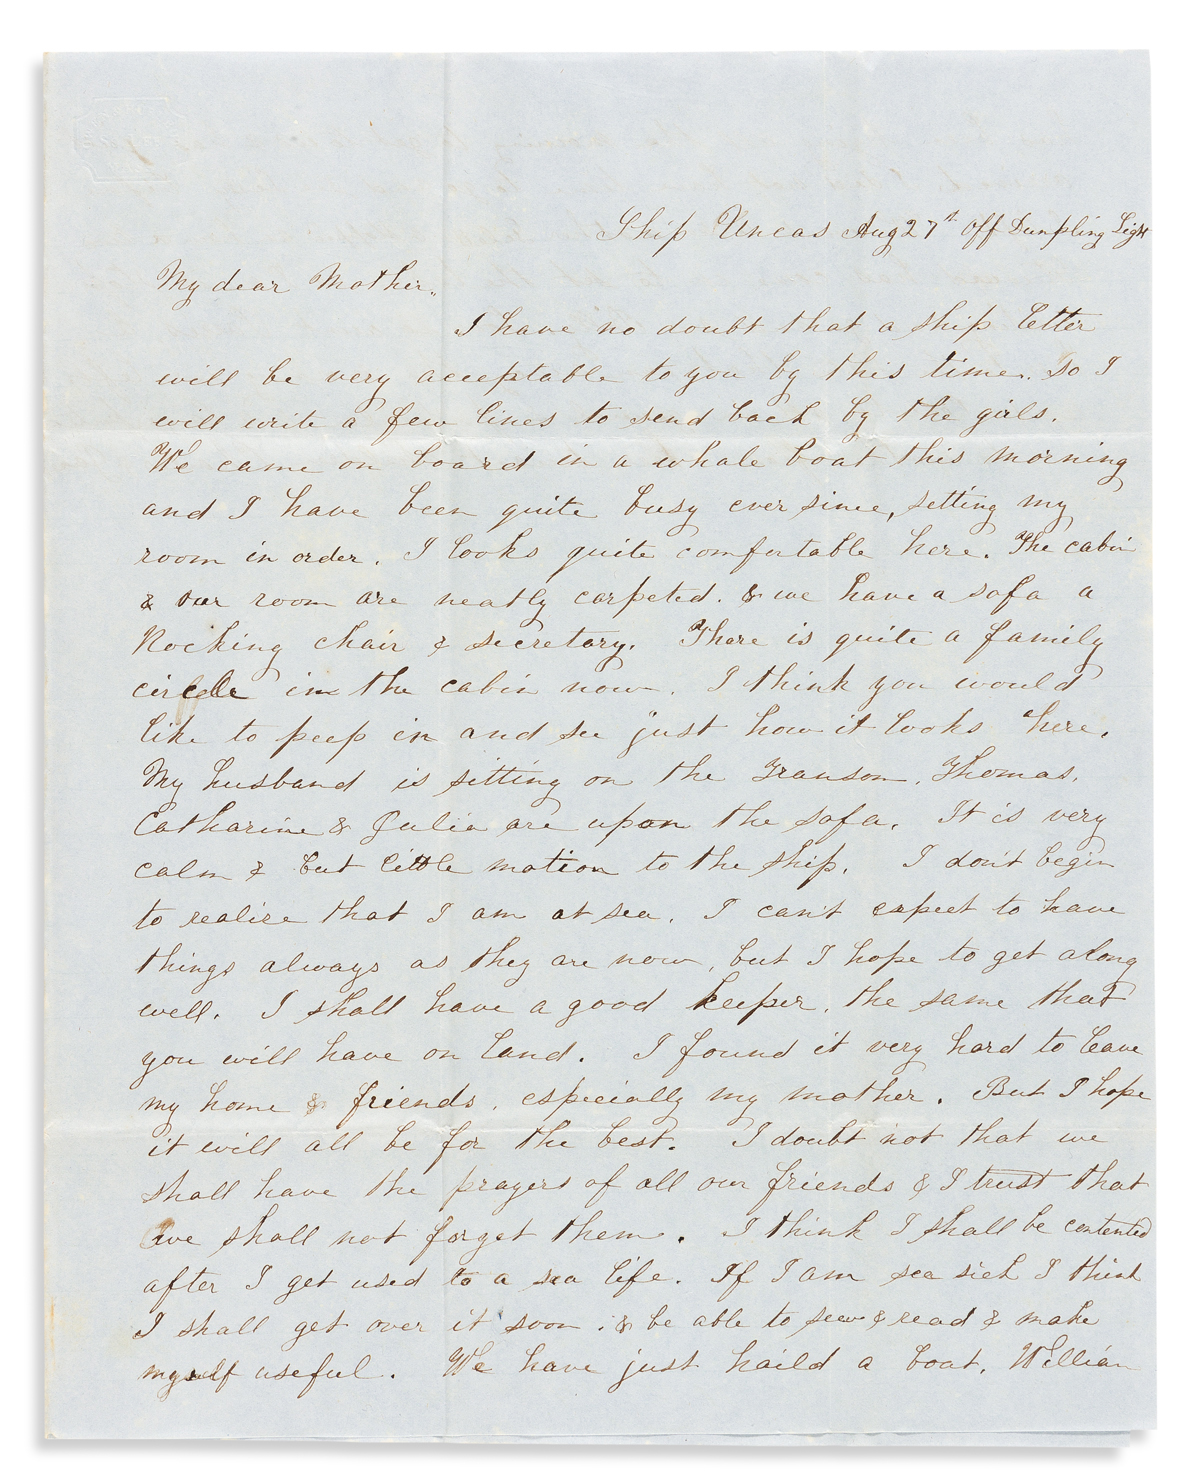 Russell, Jane (1819-1914) Archive of Letters, 1840s. Written during a Whaling Voyage, from Hawaii, and Other Ports.